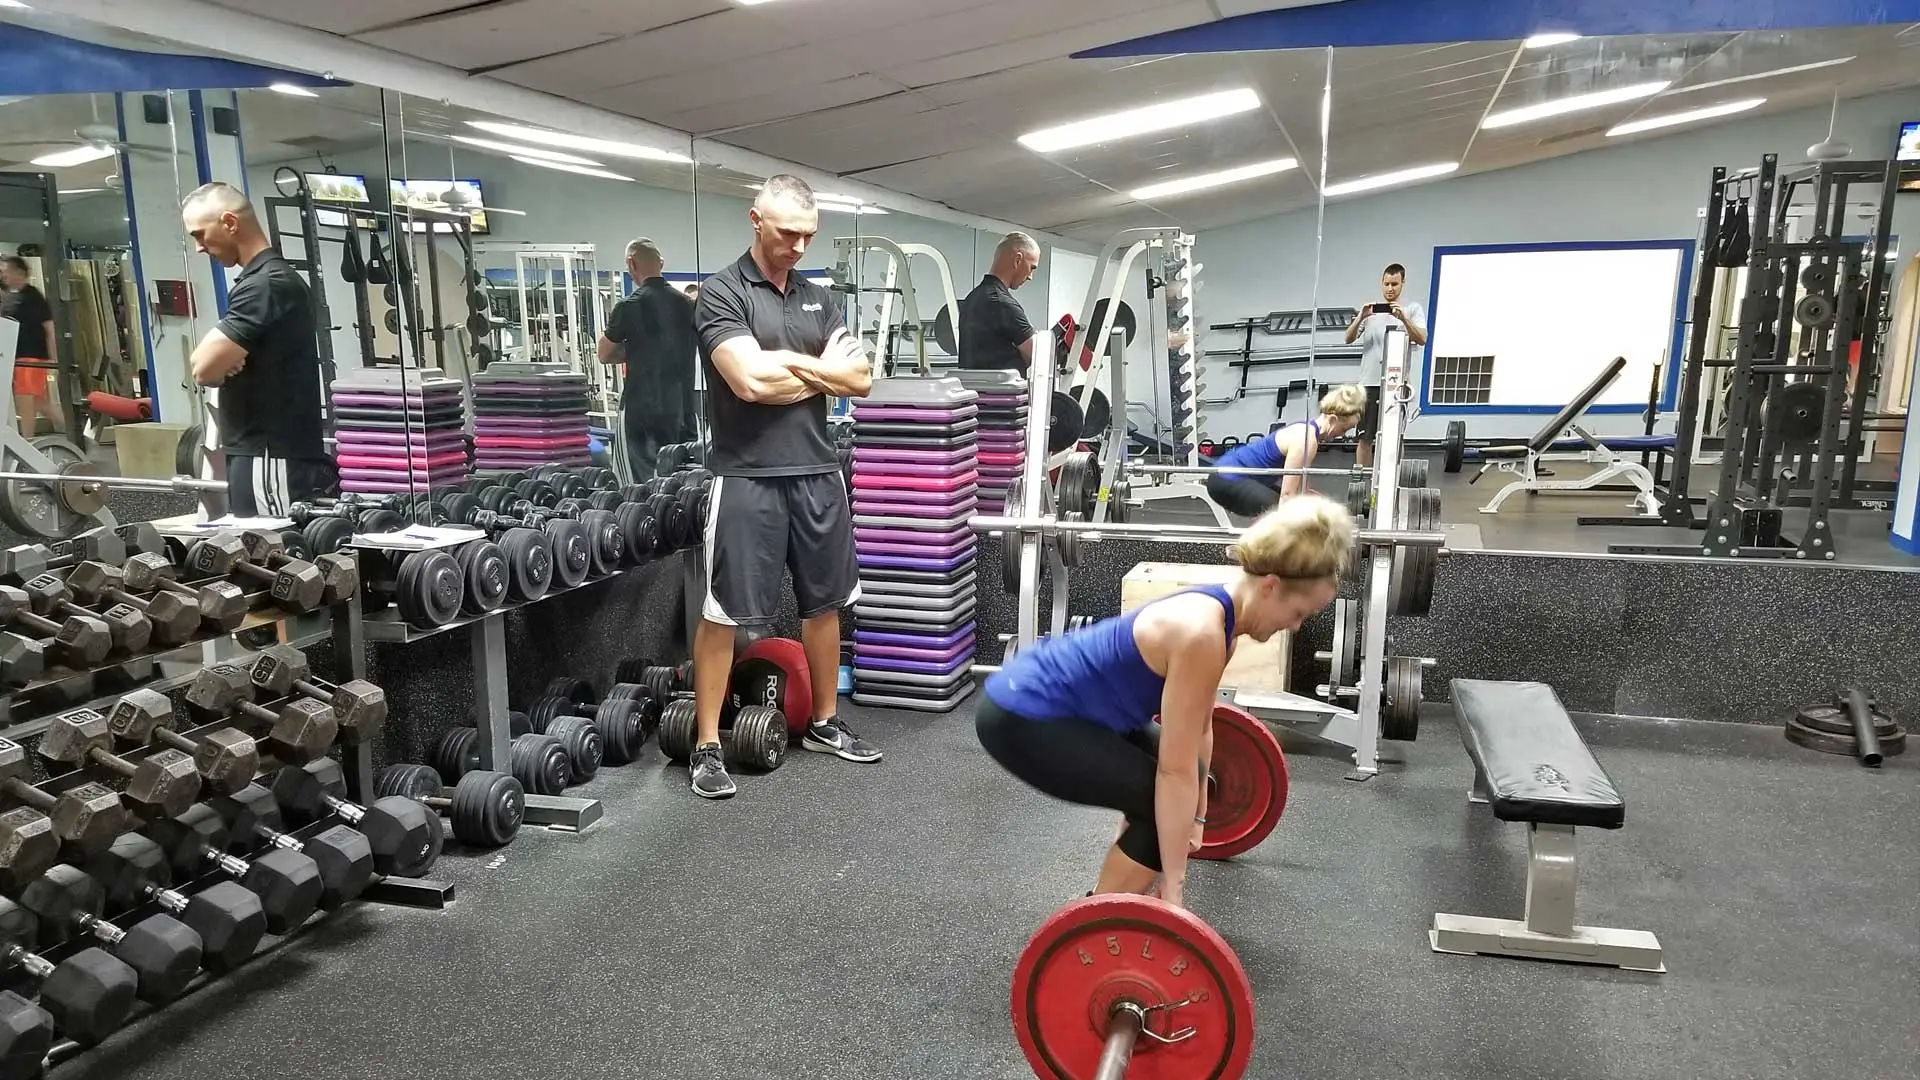 Personal training questions? Ask our professional, who is training with a mature athlete.